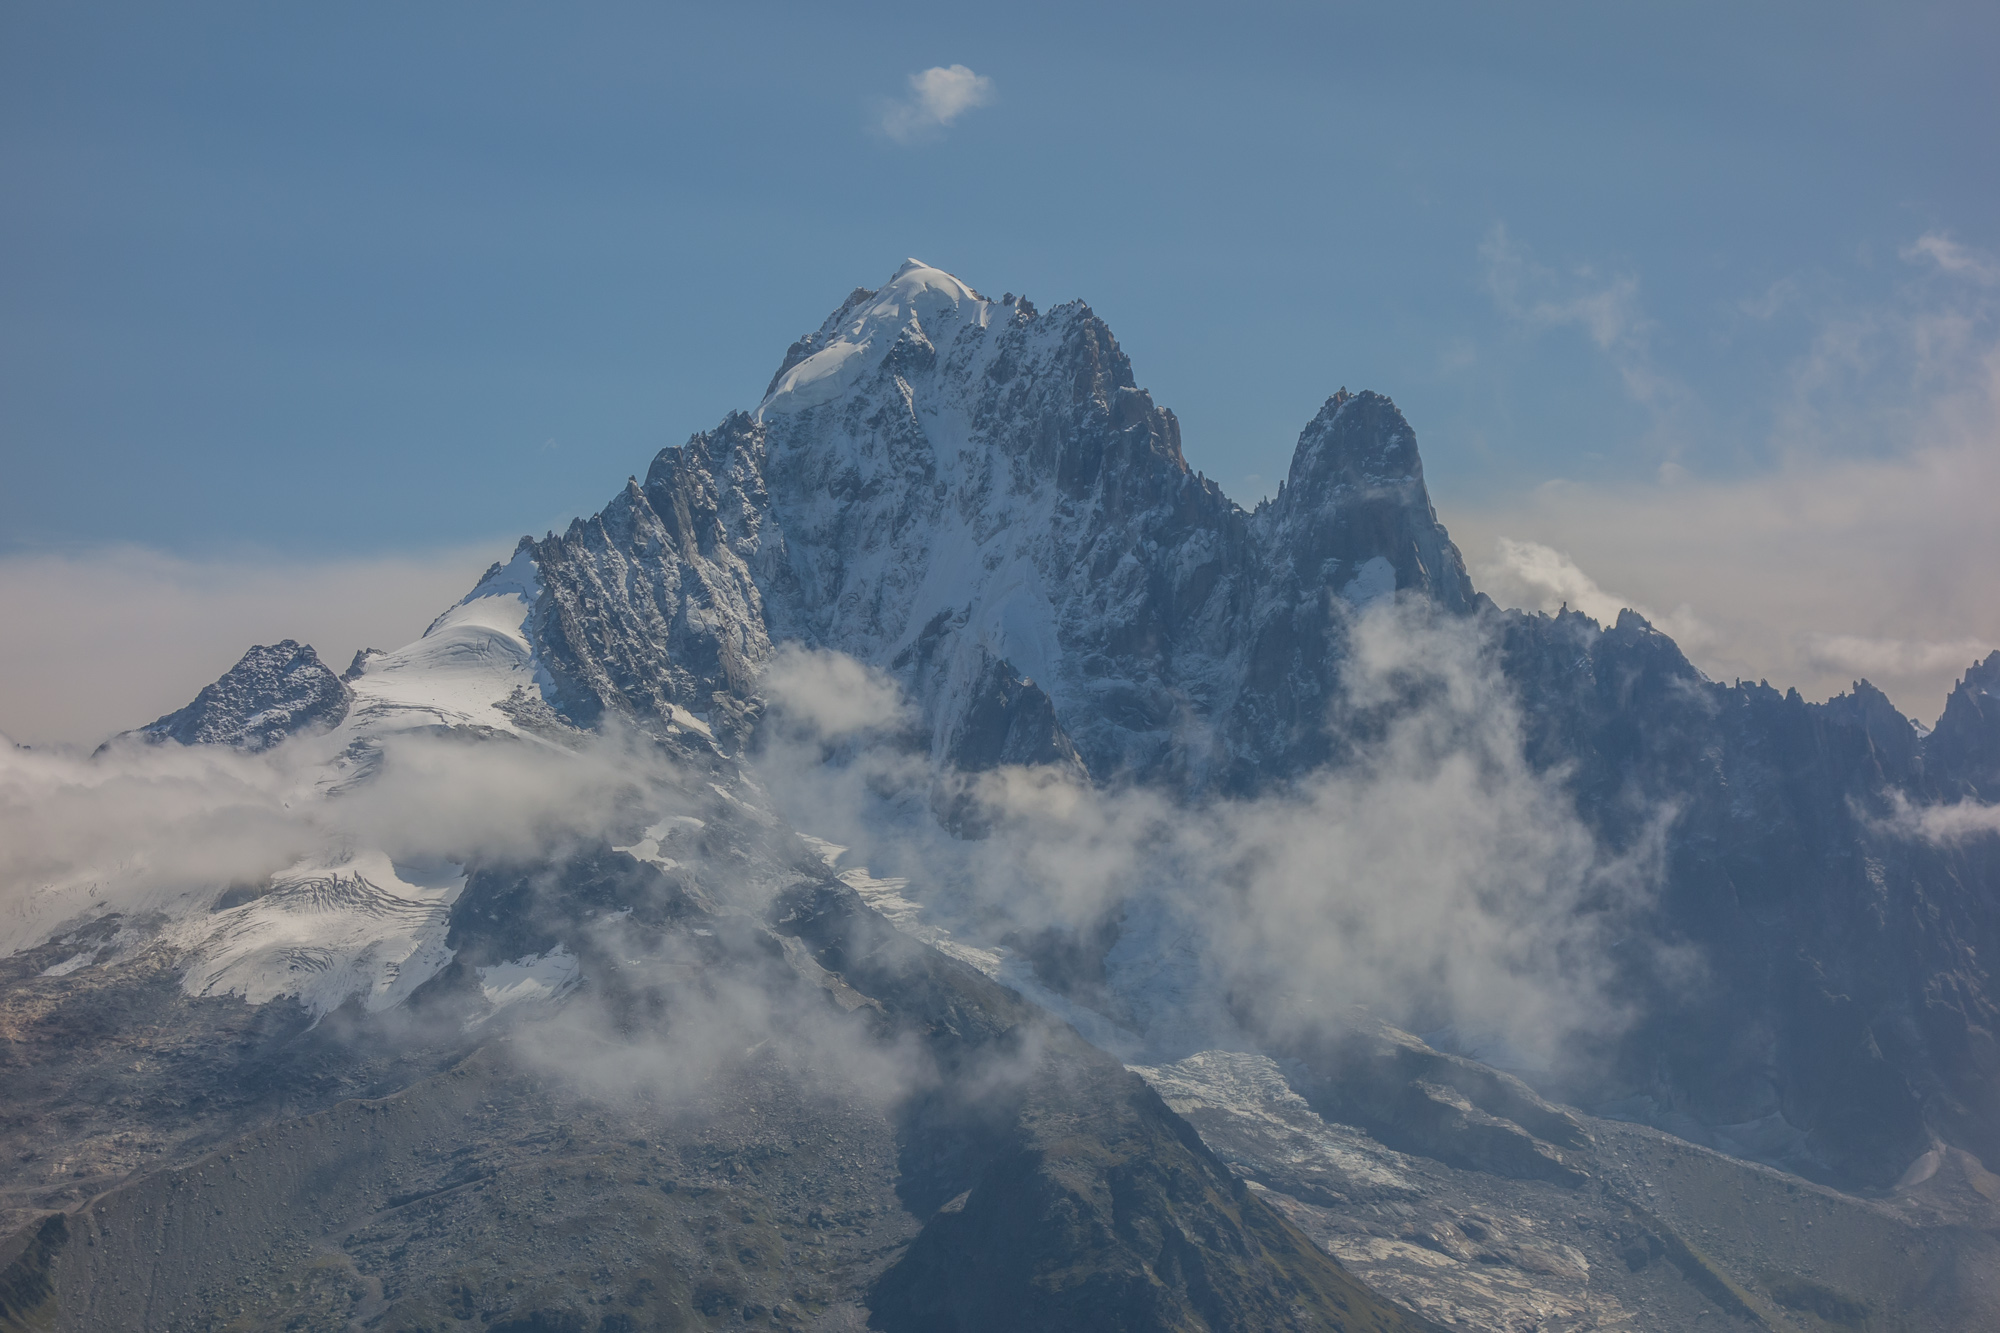 No set of photos from Chamonix is complete without one of the stunning Aiguille Verte and Aiguille du Dru - maybe next year!